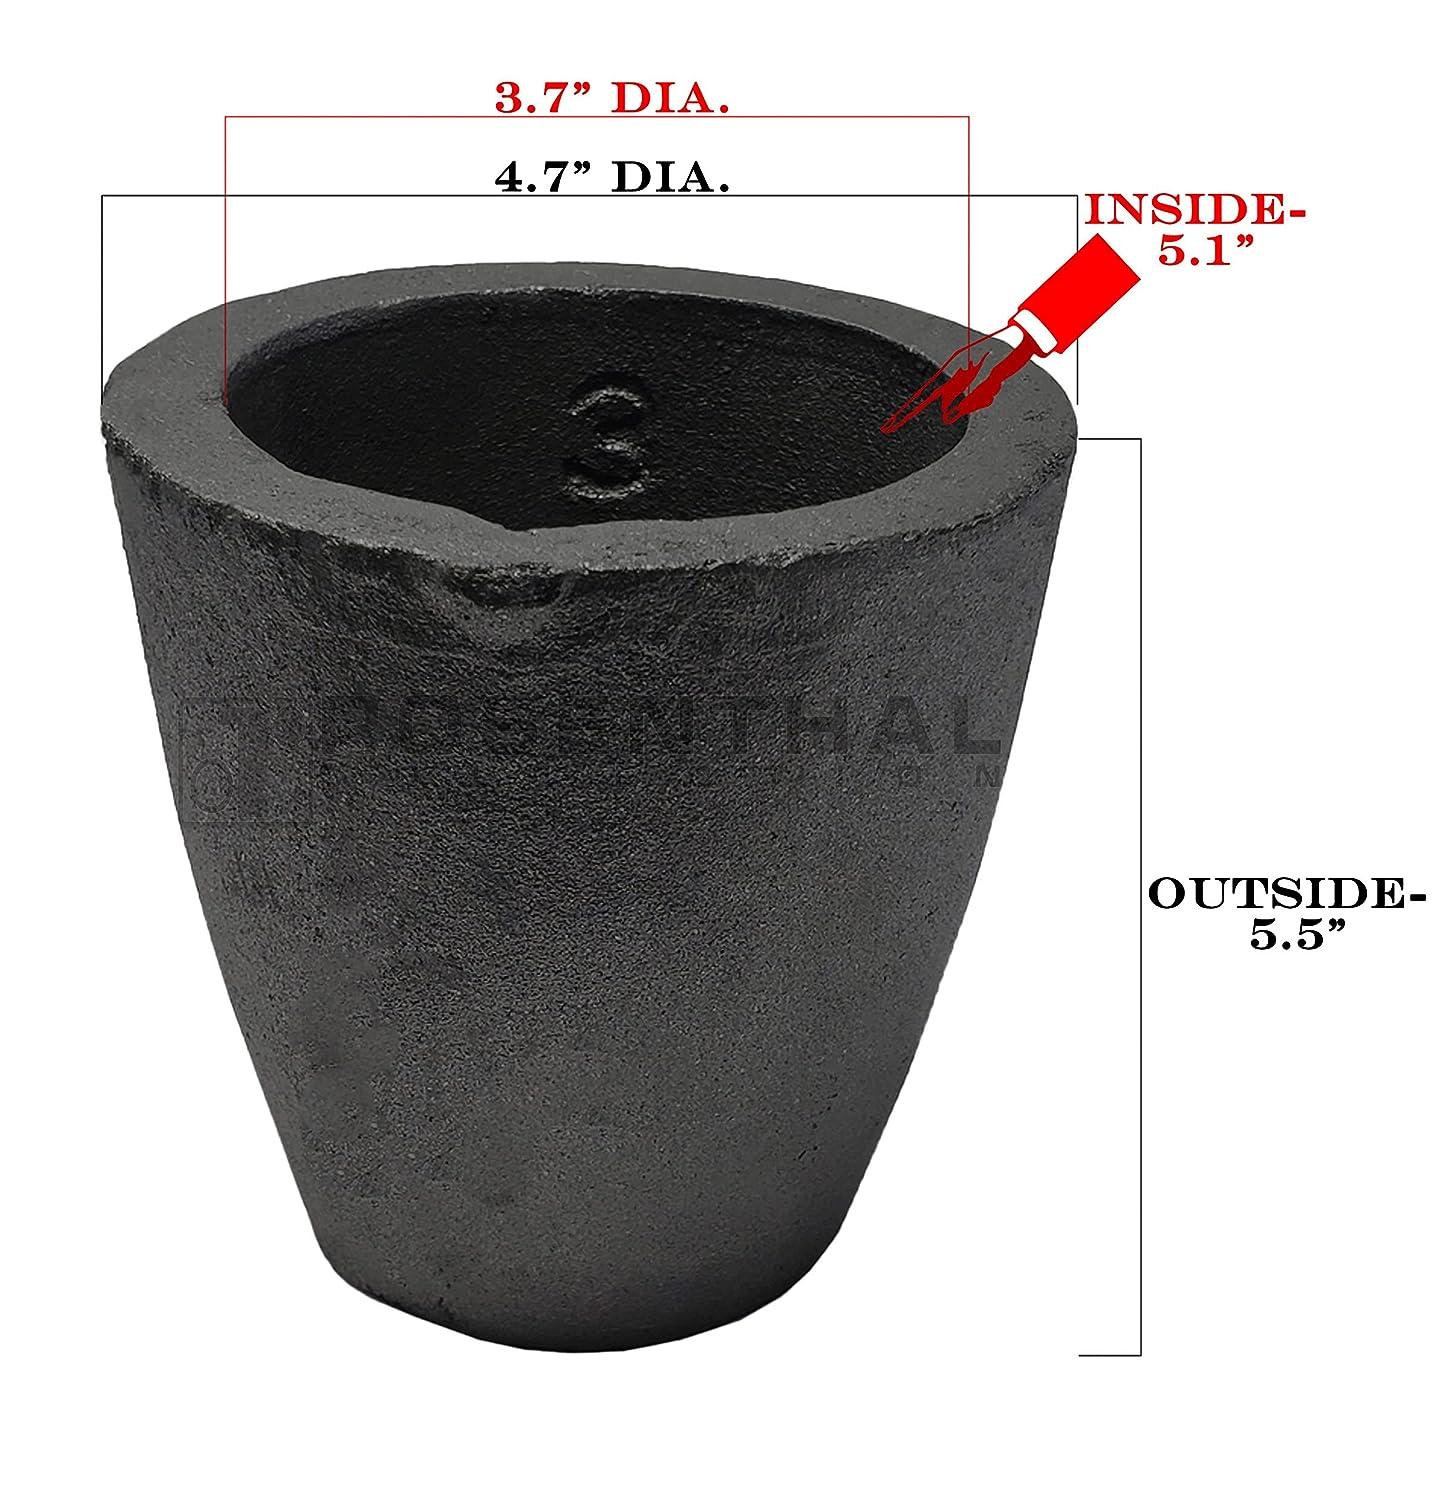 Graphite Crucibles for Melting Metal Gold Silver Foundry Crucible